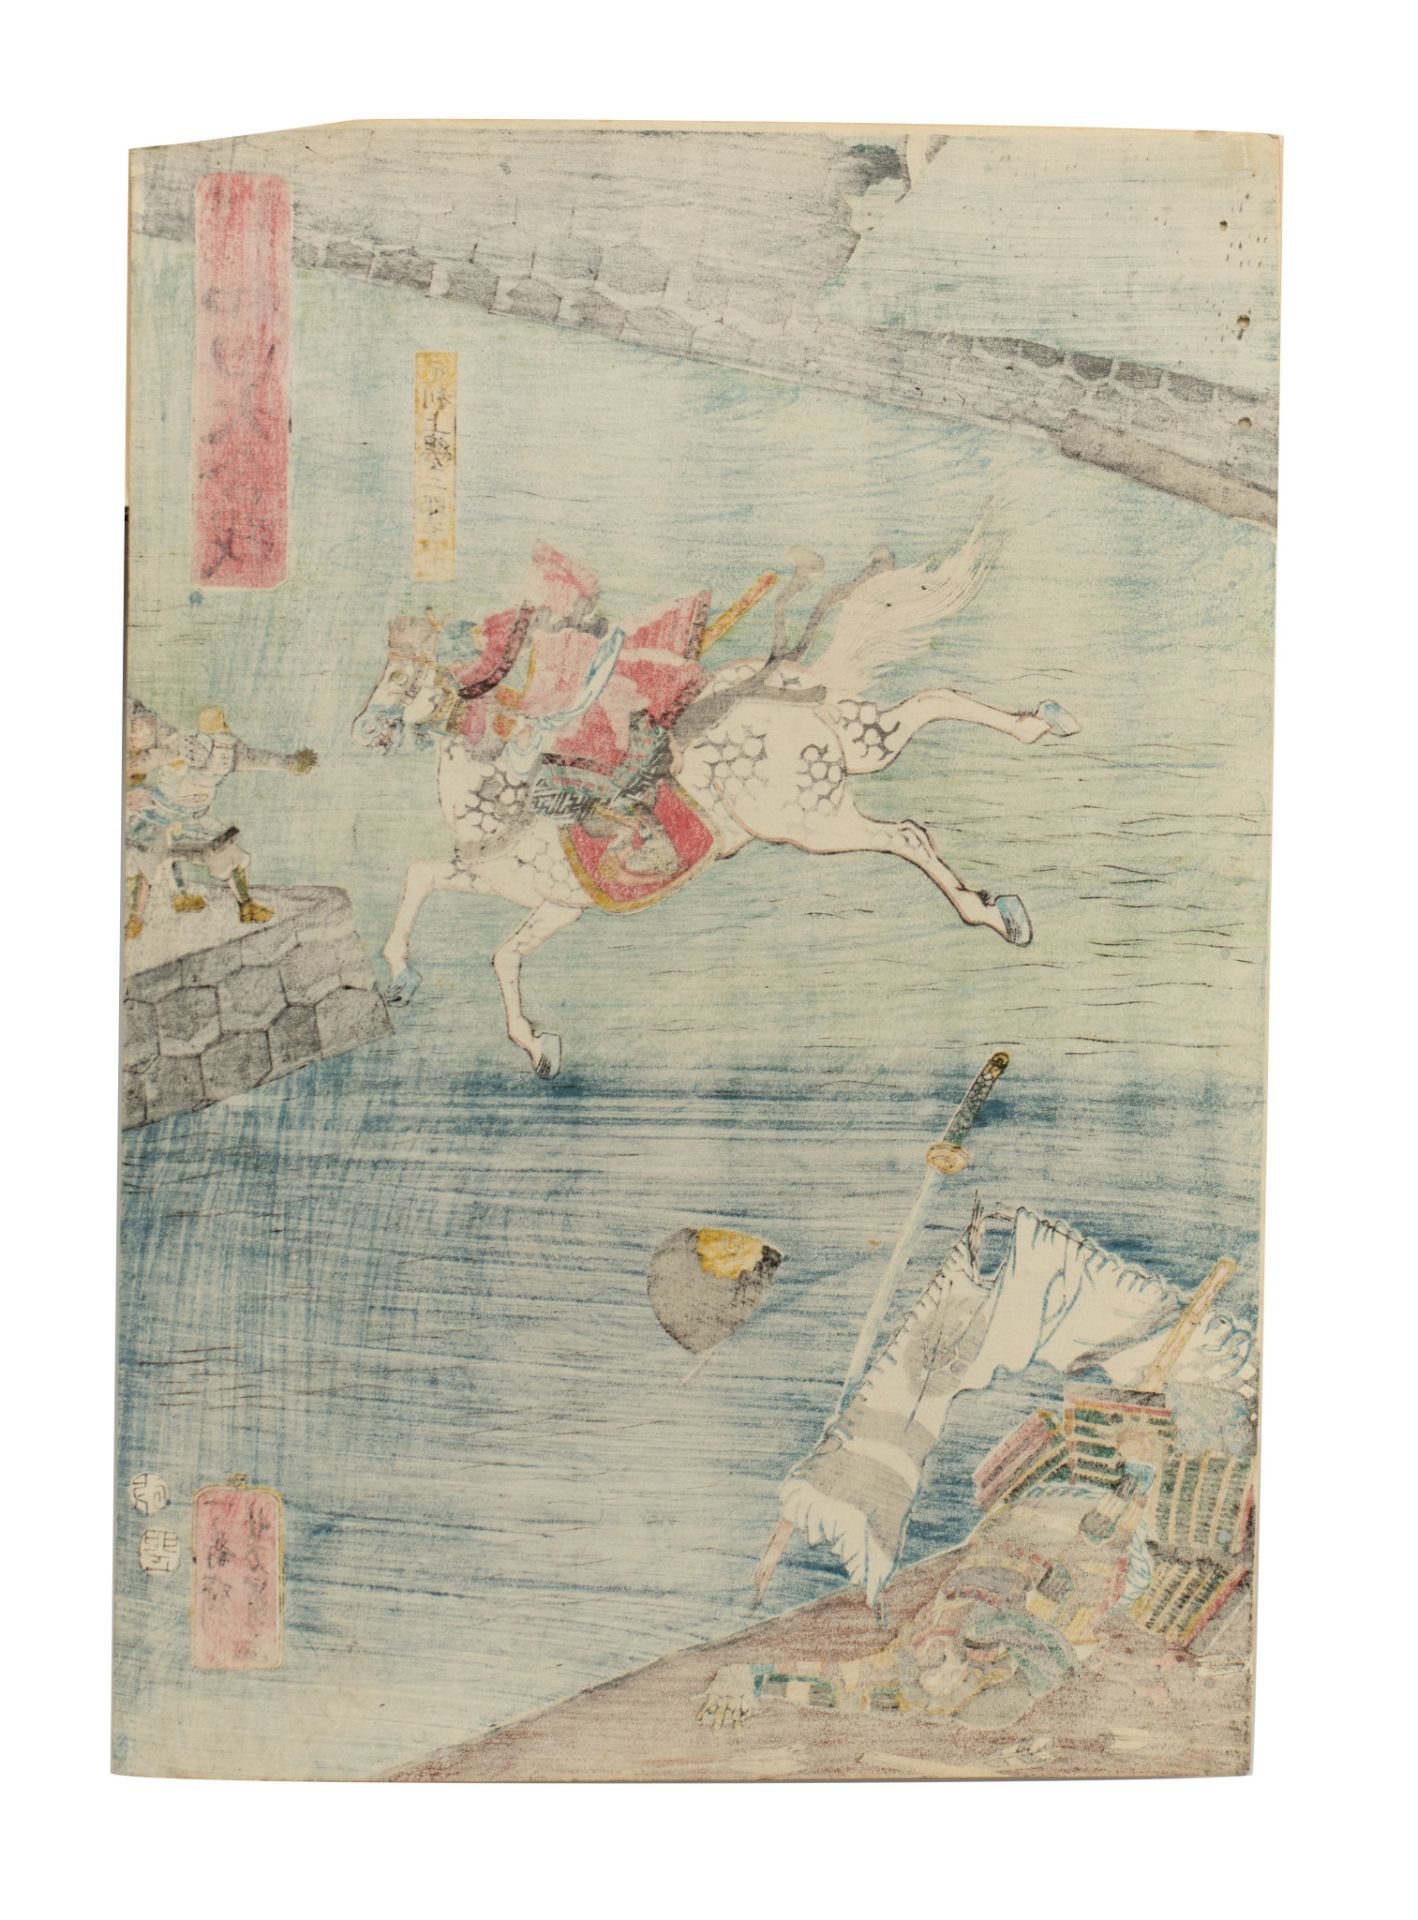 A triptych of Japanese woodblock prints by Yoshikazu, attack on Ichi-No-Tani, ca. 1858 (+) - Image 3 of 7